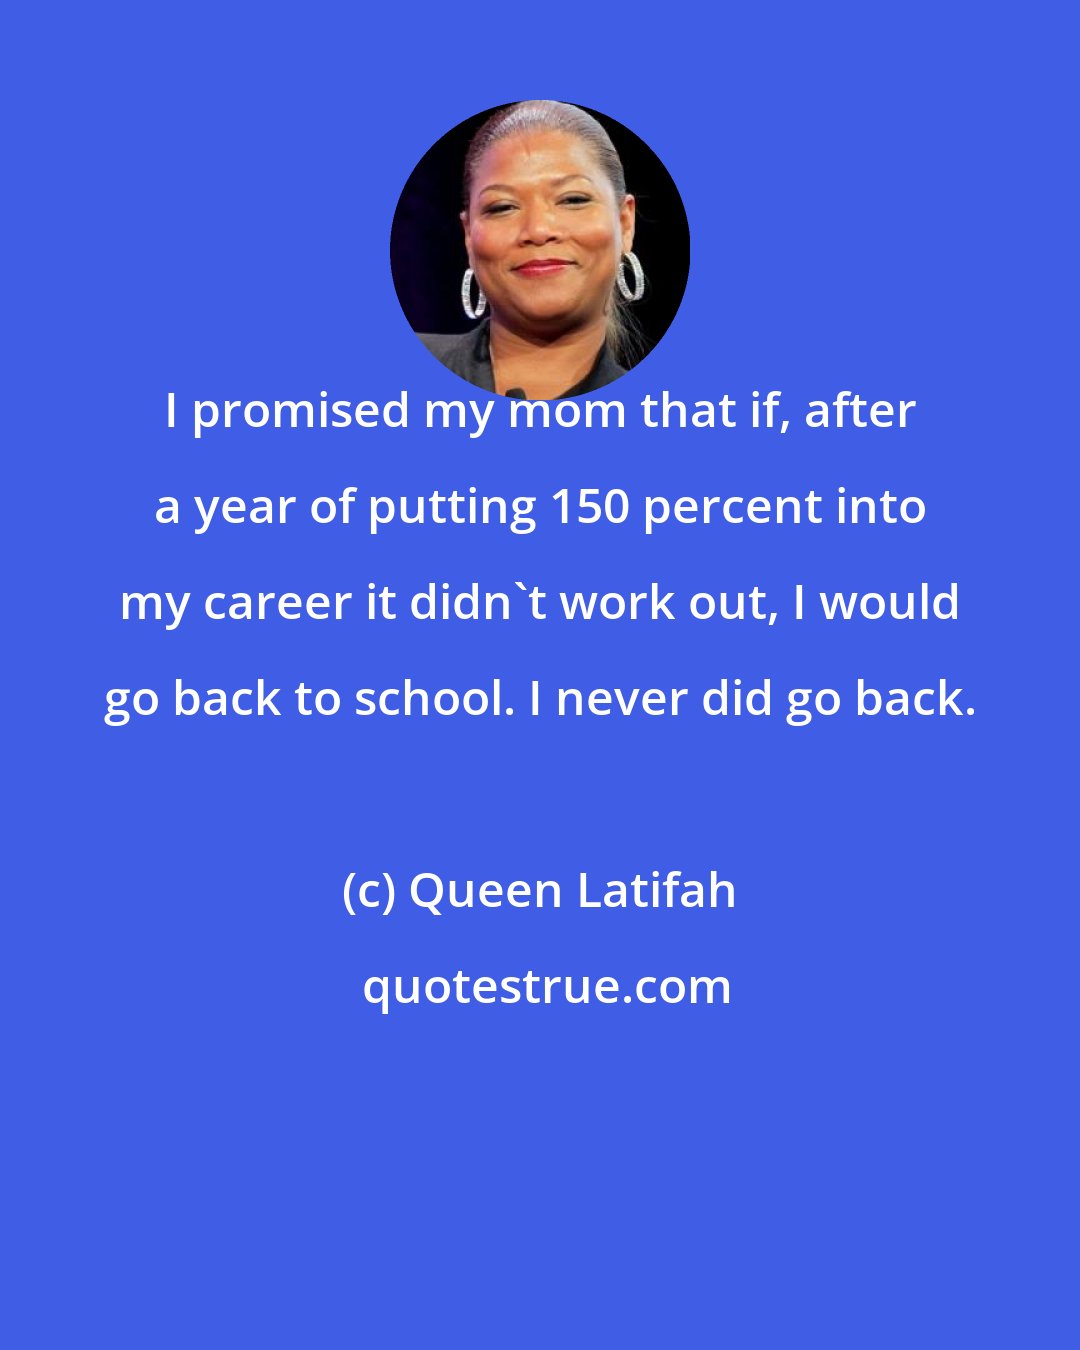 Queen Latifah: I promised my mom that if, after a year of putting 150 percent into my career it didn't work out, I would go back to school. I never did go back.